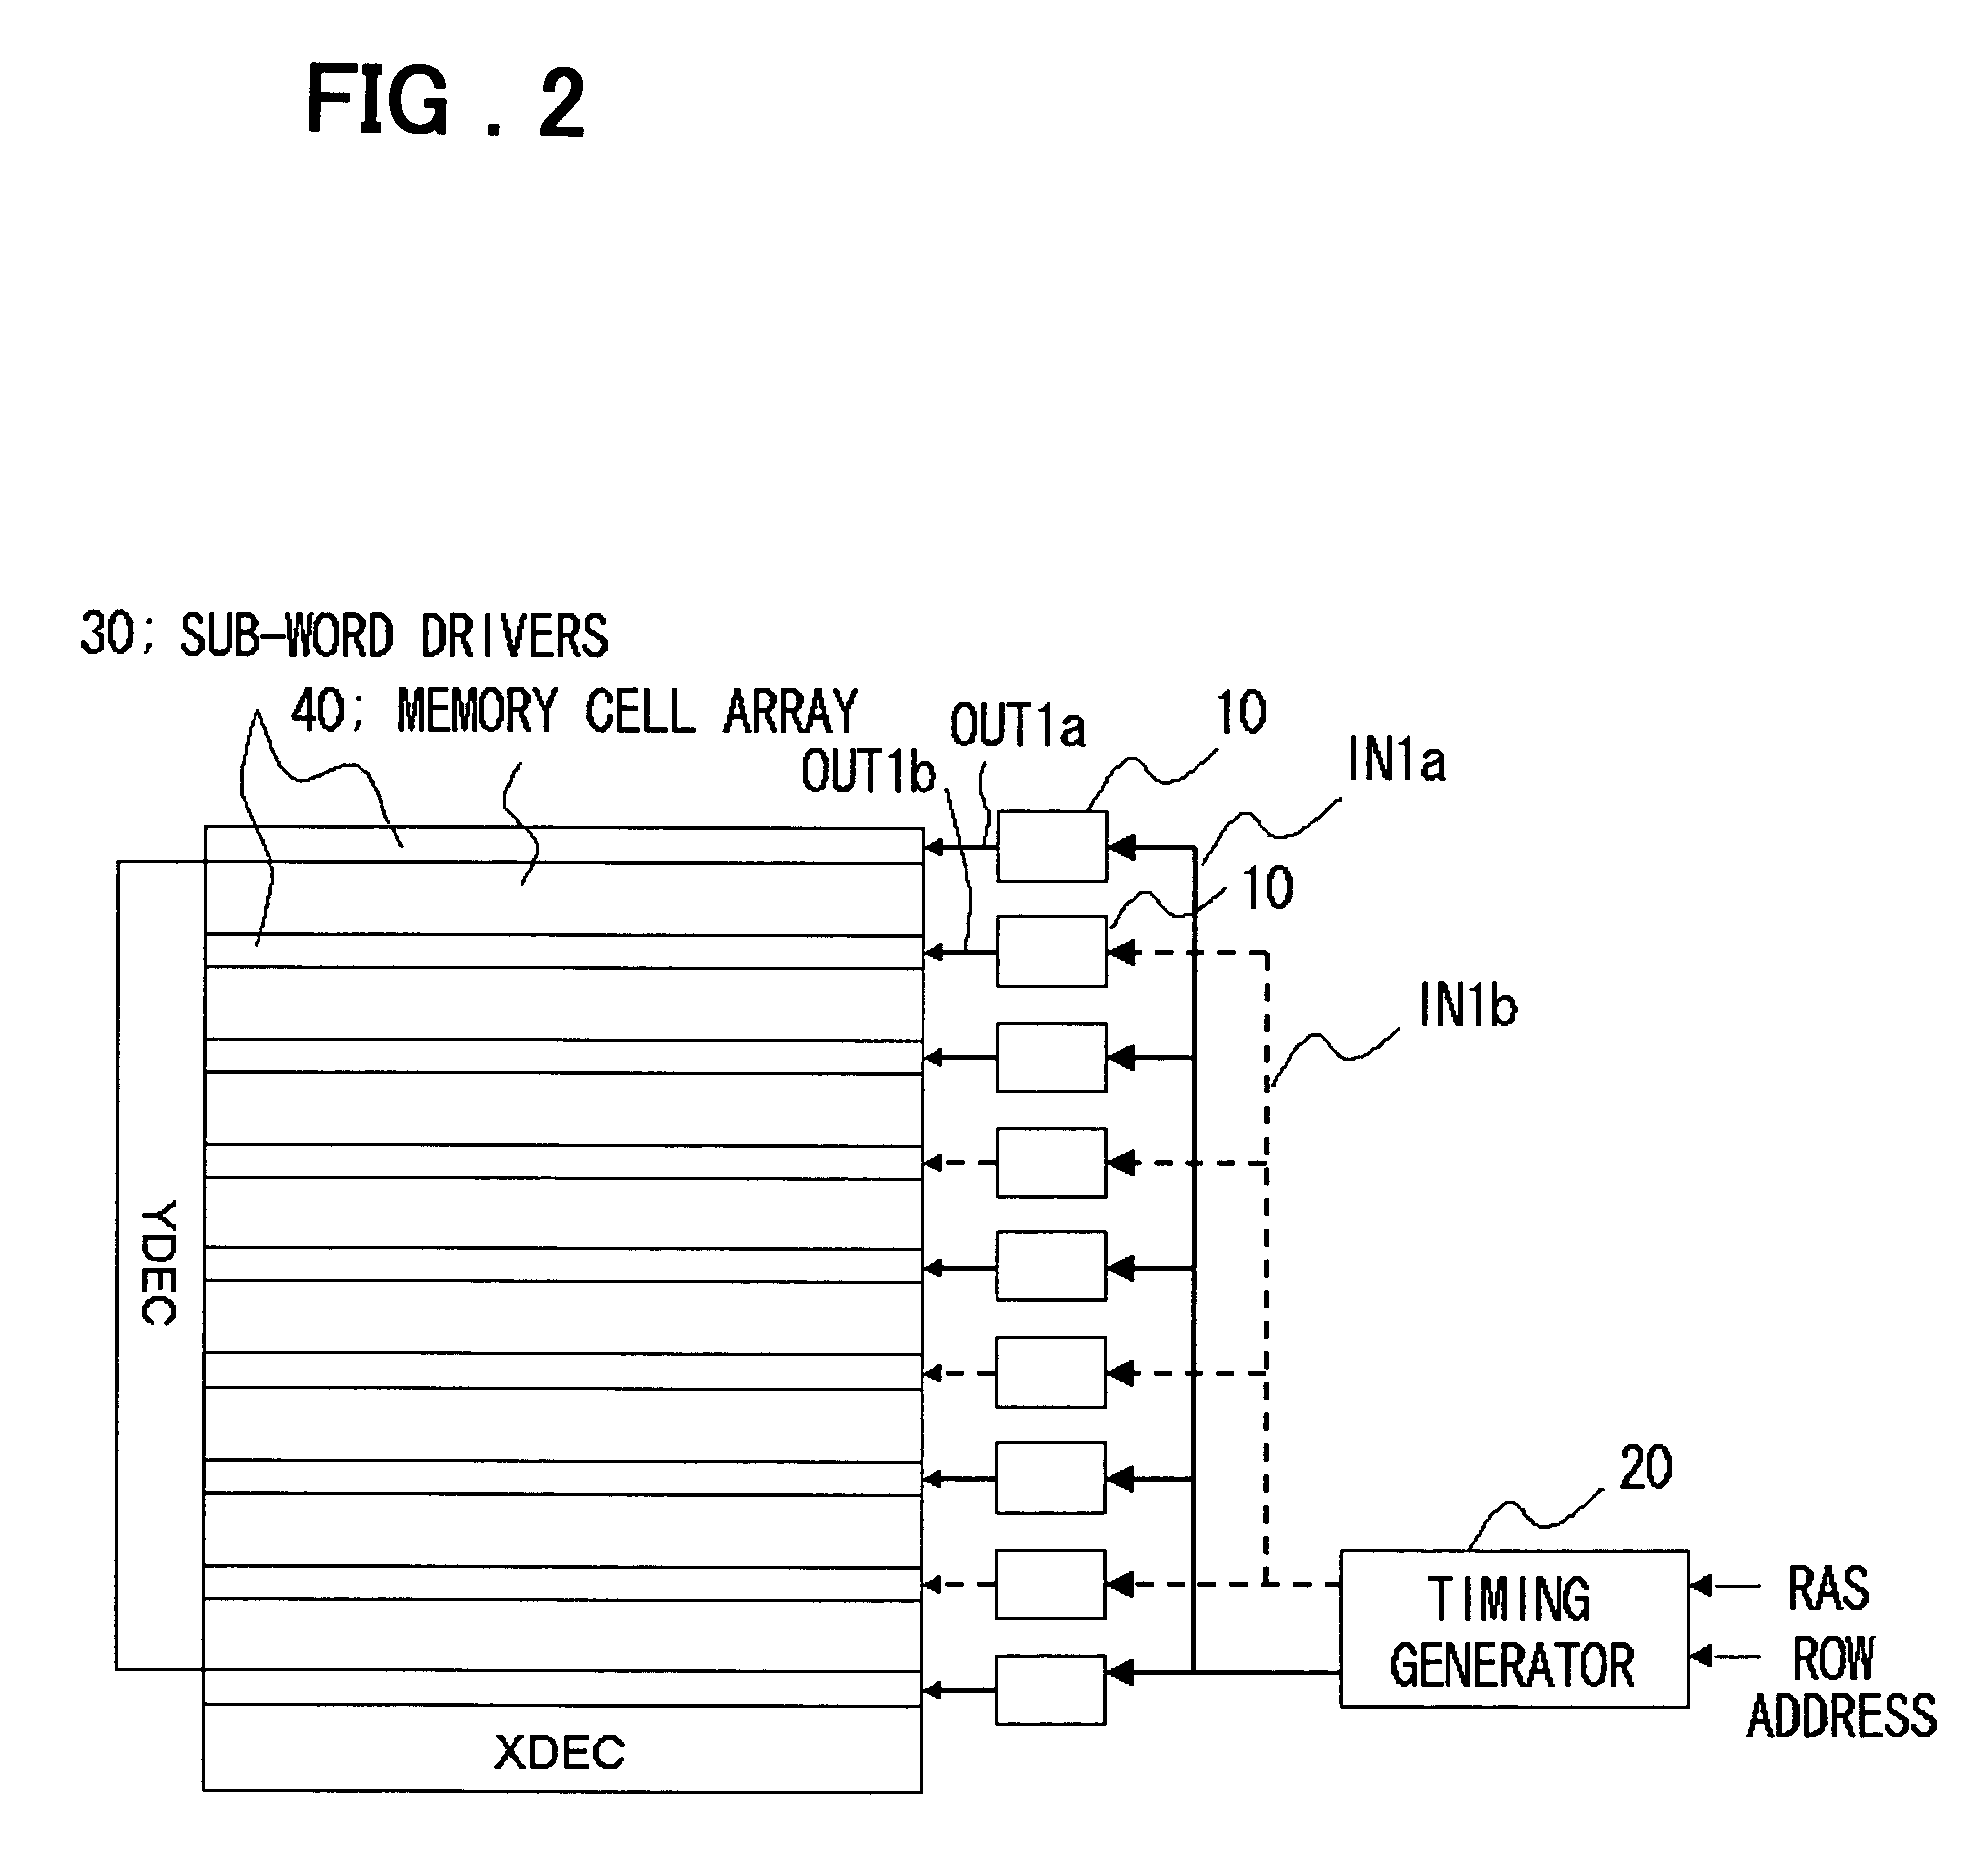 Word line driving circuit with a word line detection circuit